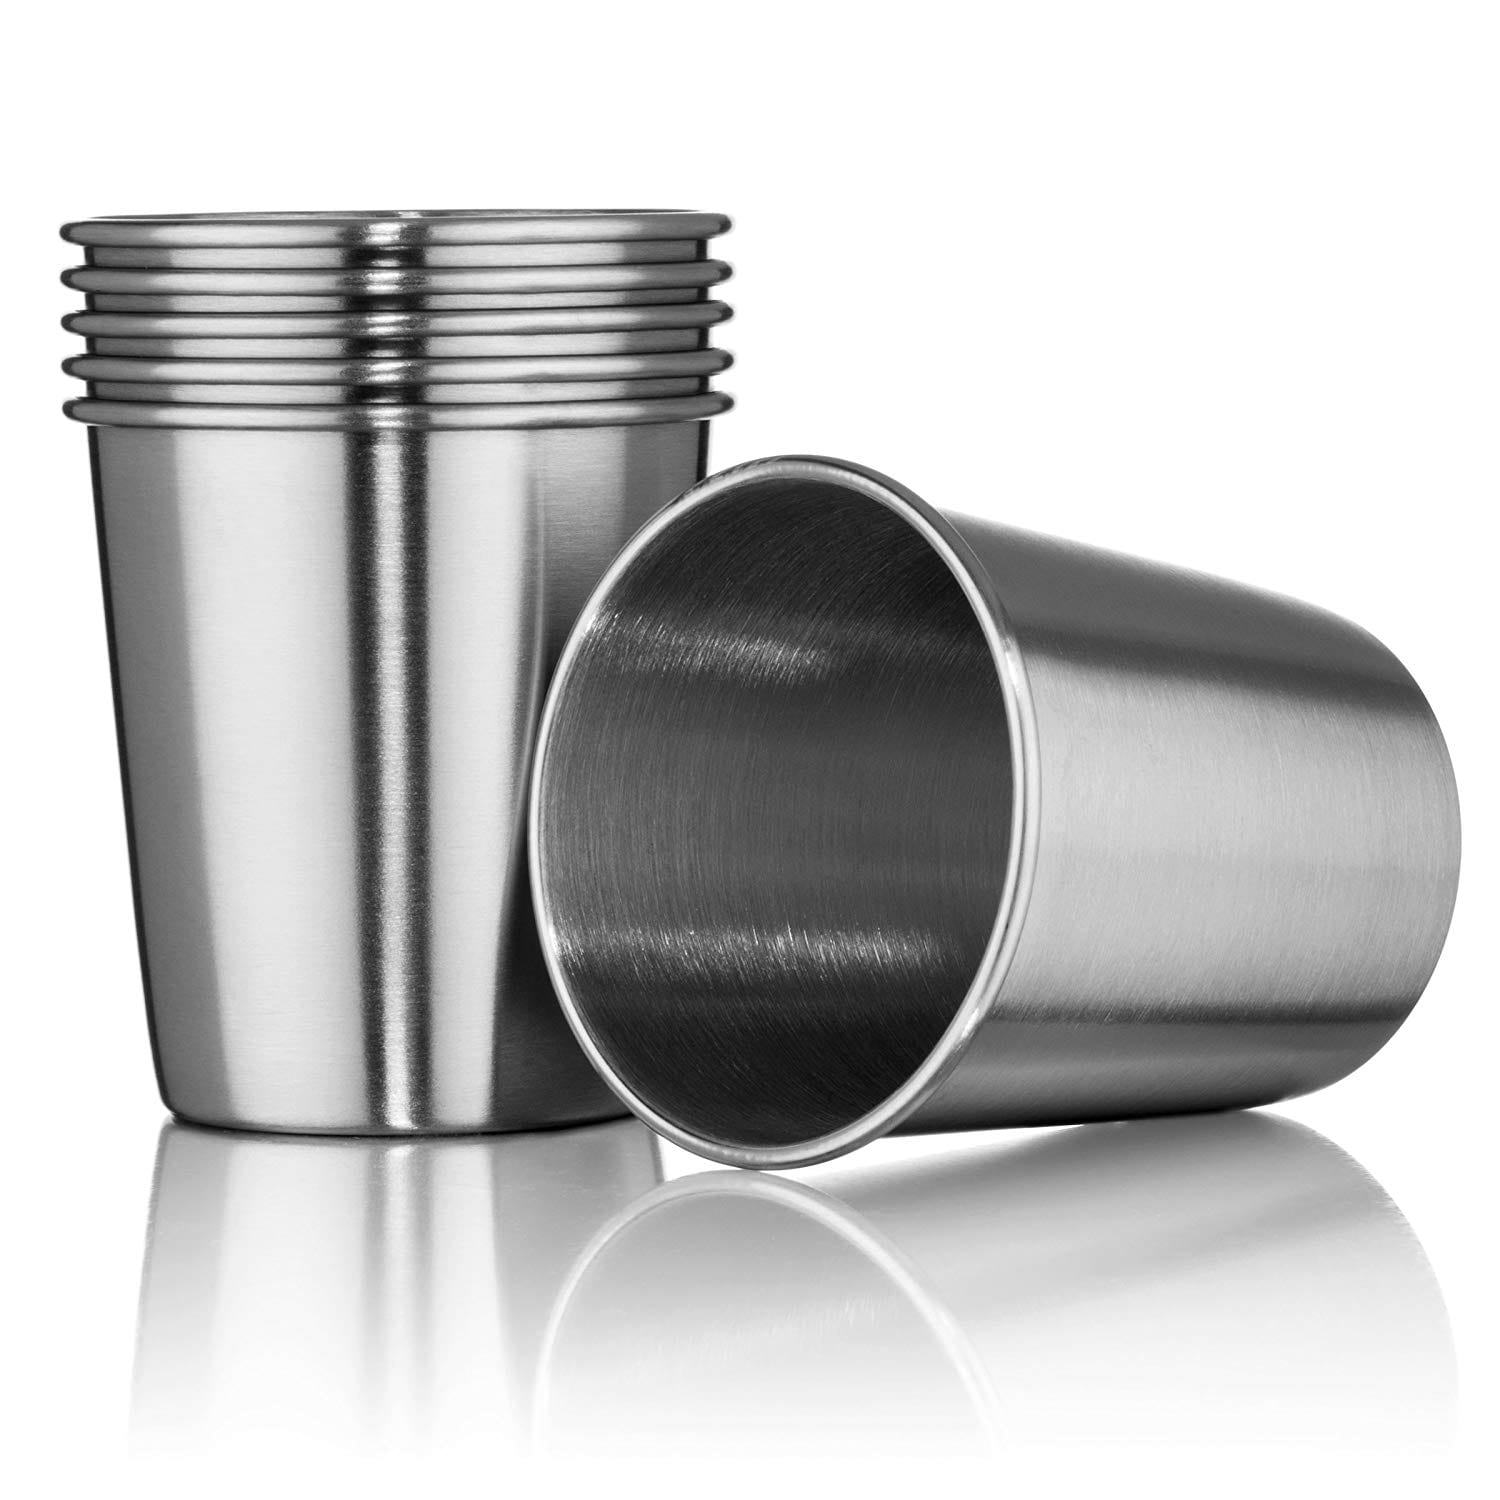 Stainless Steel Cups Double Wall Tumbler Glasses 16 oz - Premium Pint Cups  - Set of 2 - Stackable Sh…See more Stainless Steel Cups Double Wall Tumbler